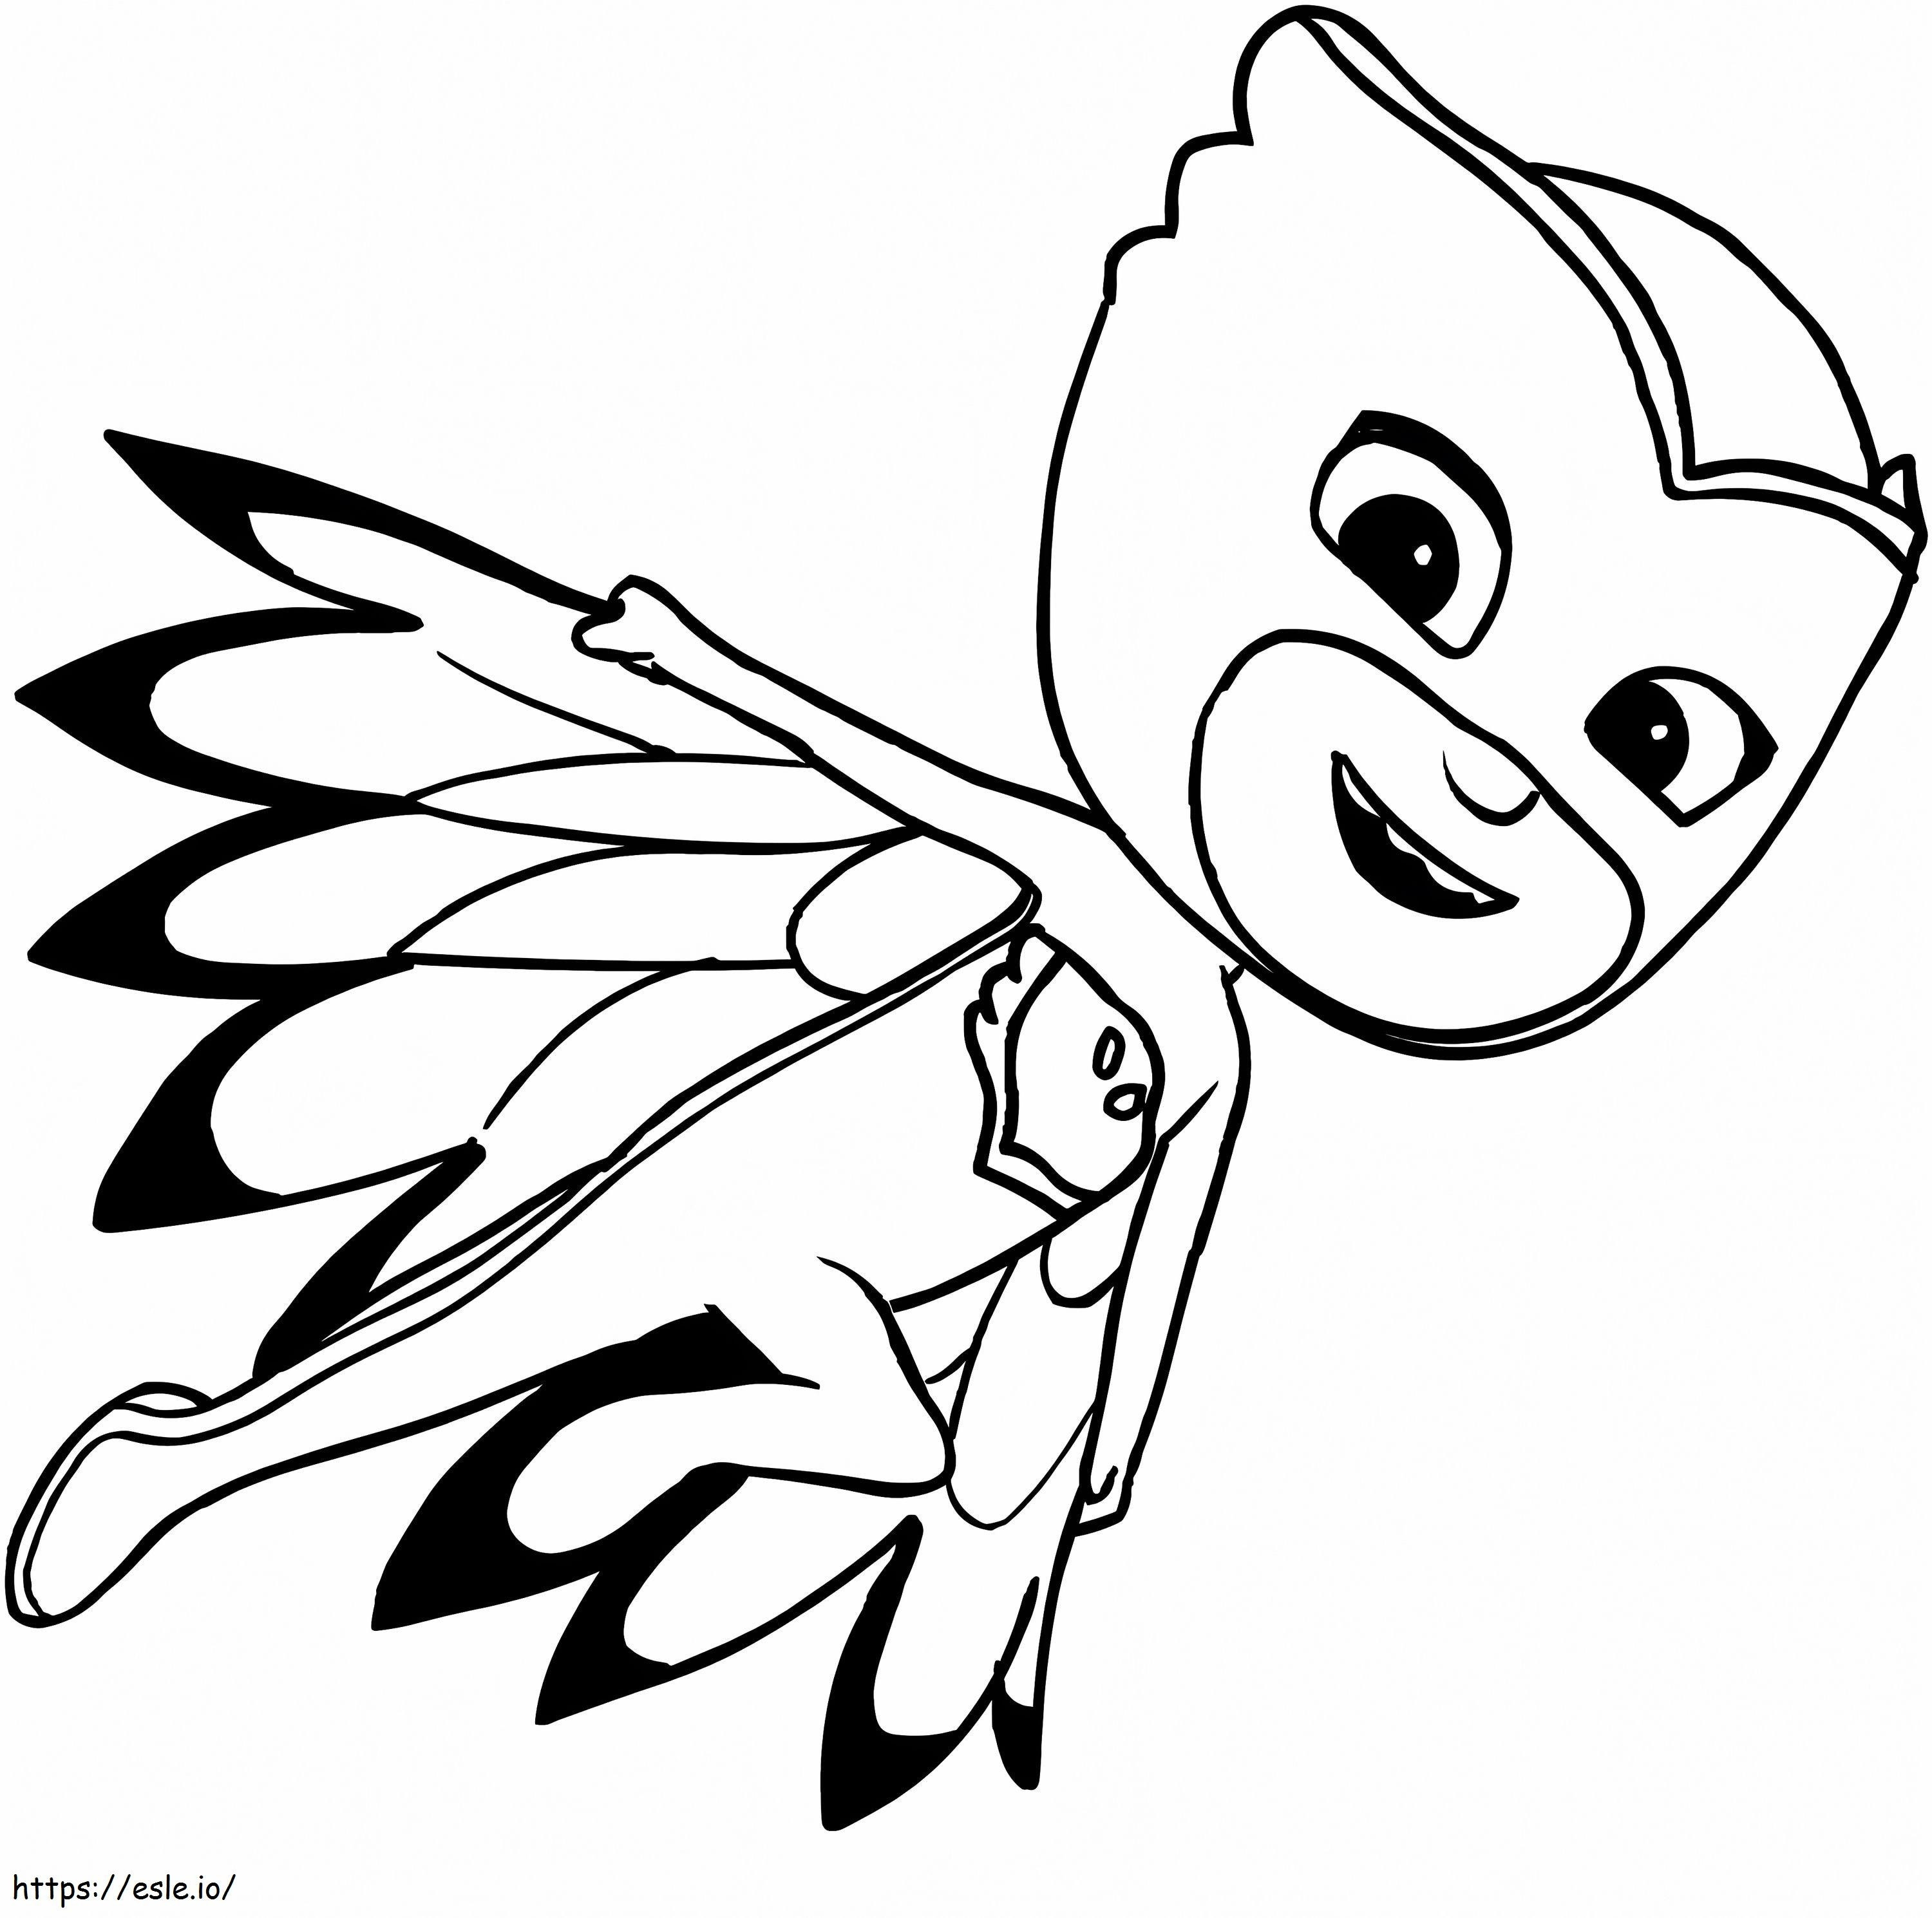 Owlette Flying coloring page